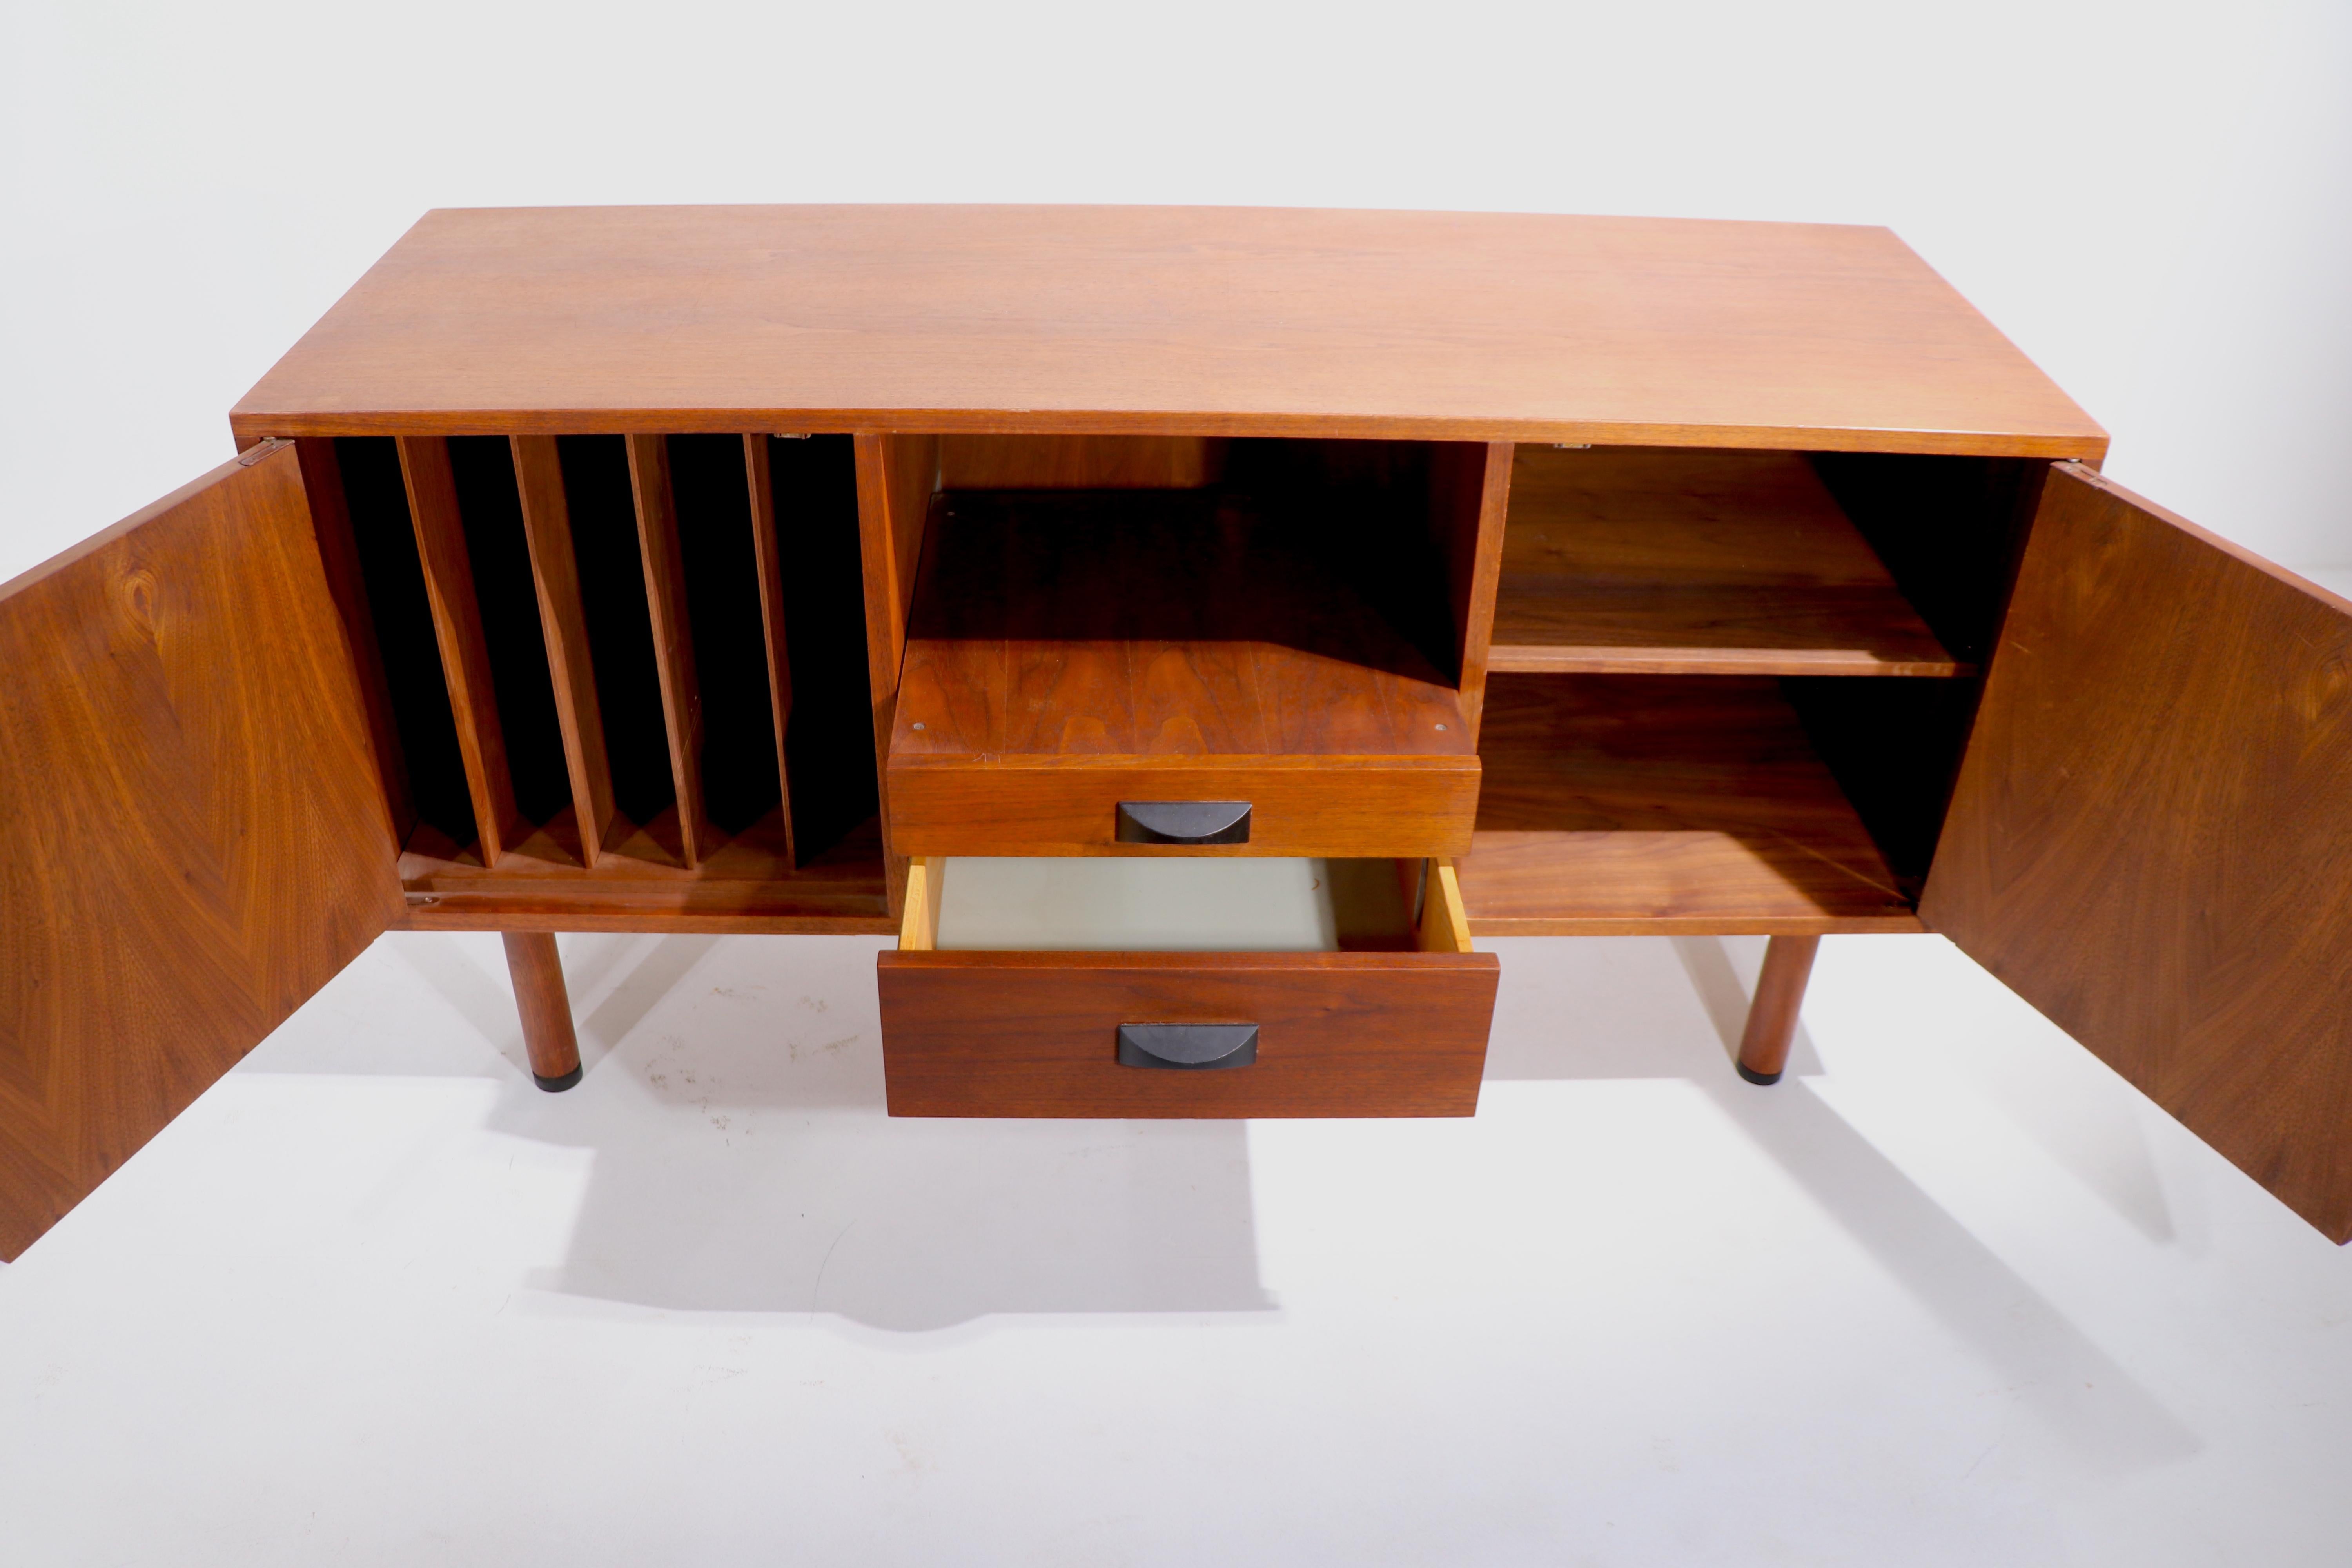 20th Century Mid Century Credenza Stereo Cabinet by Hardwood House After Risom